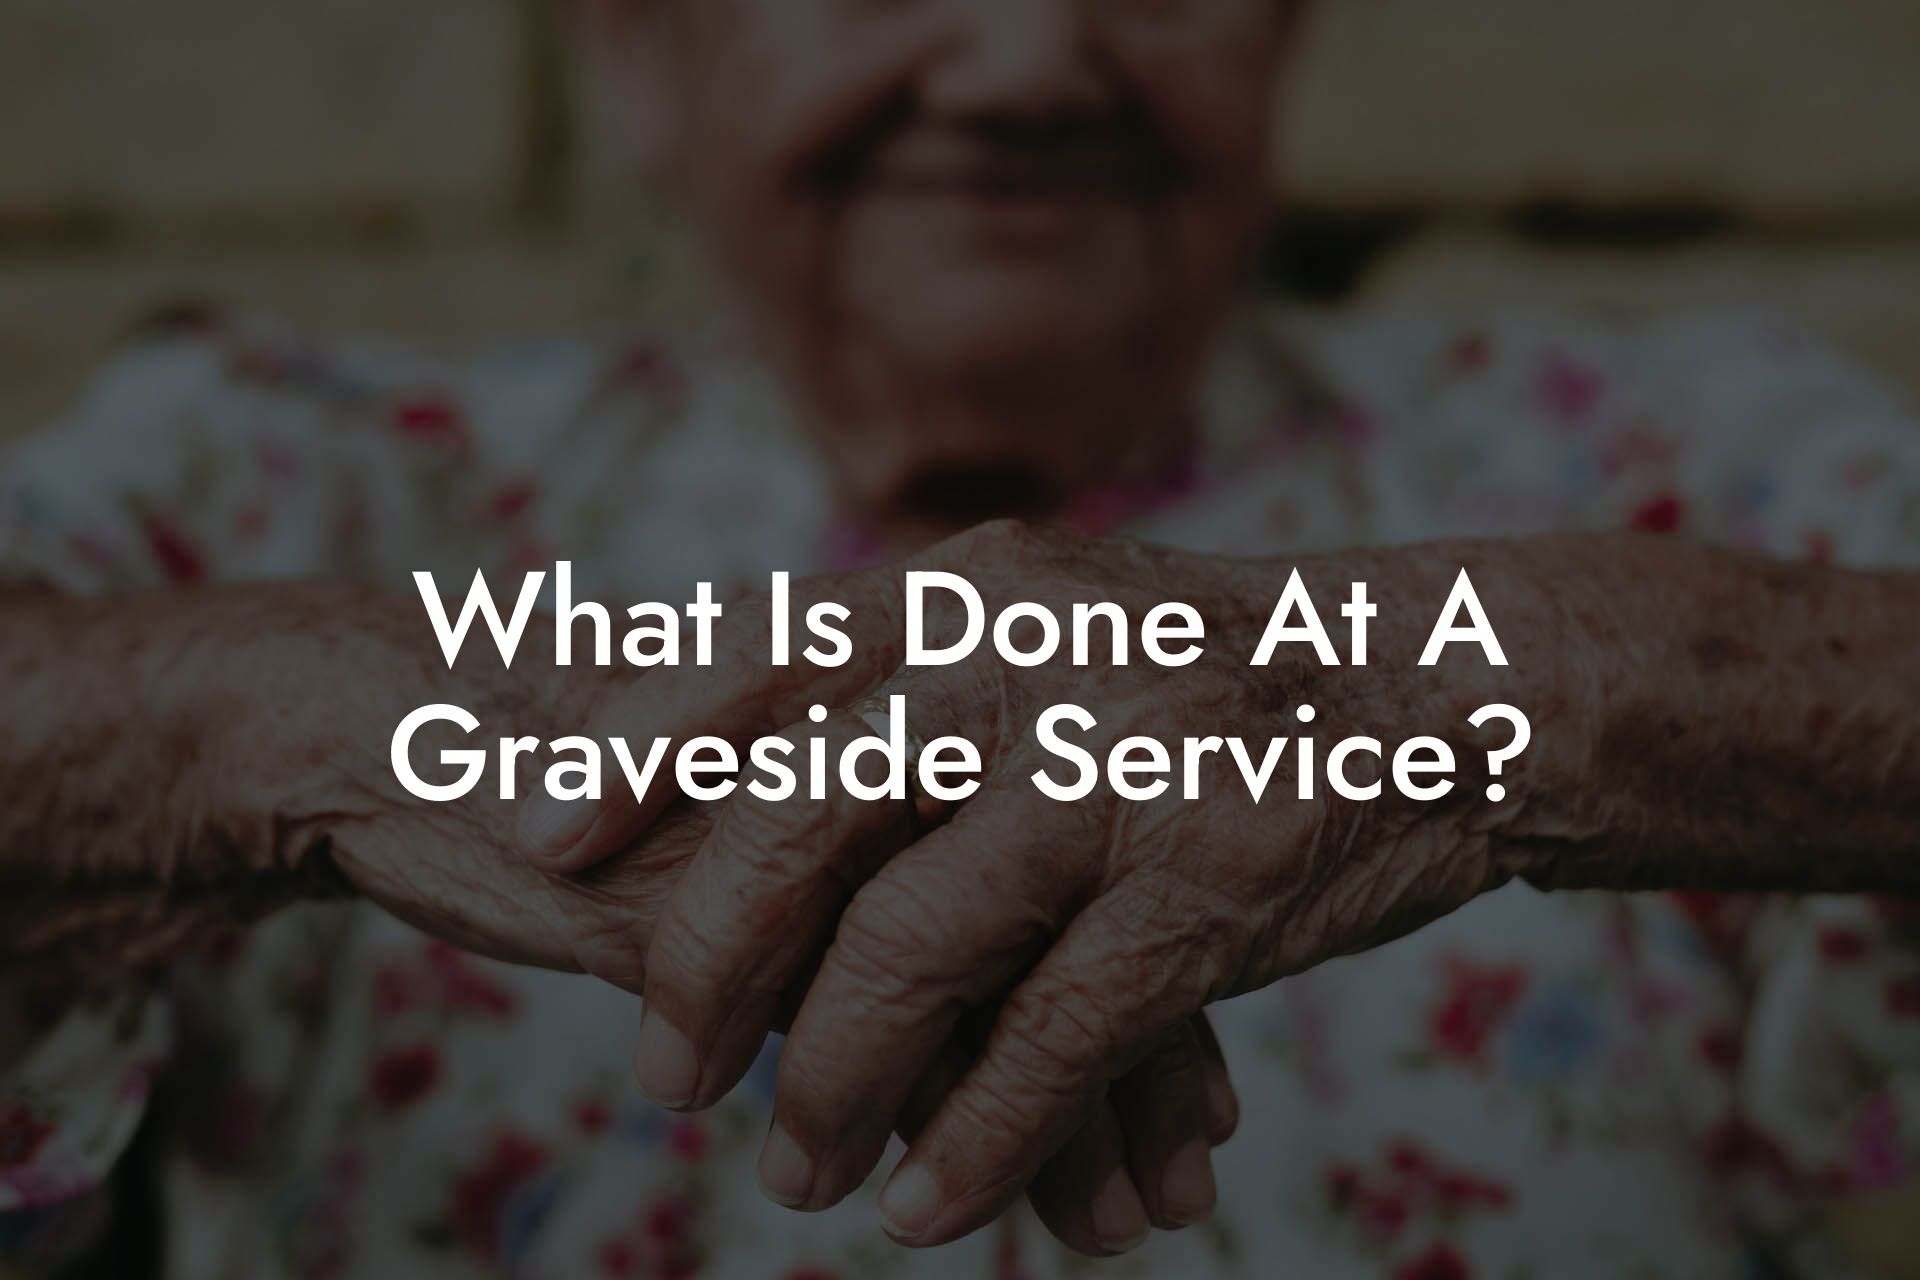 What Is Done At A Graveside Service?